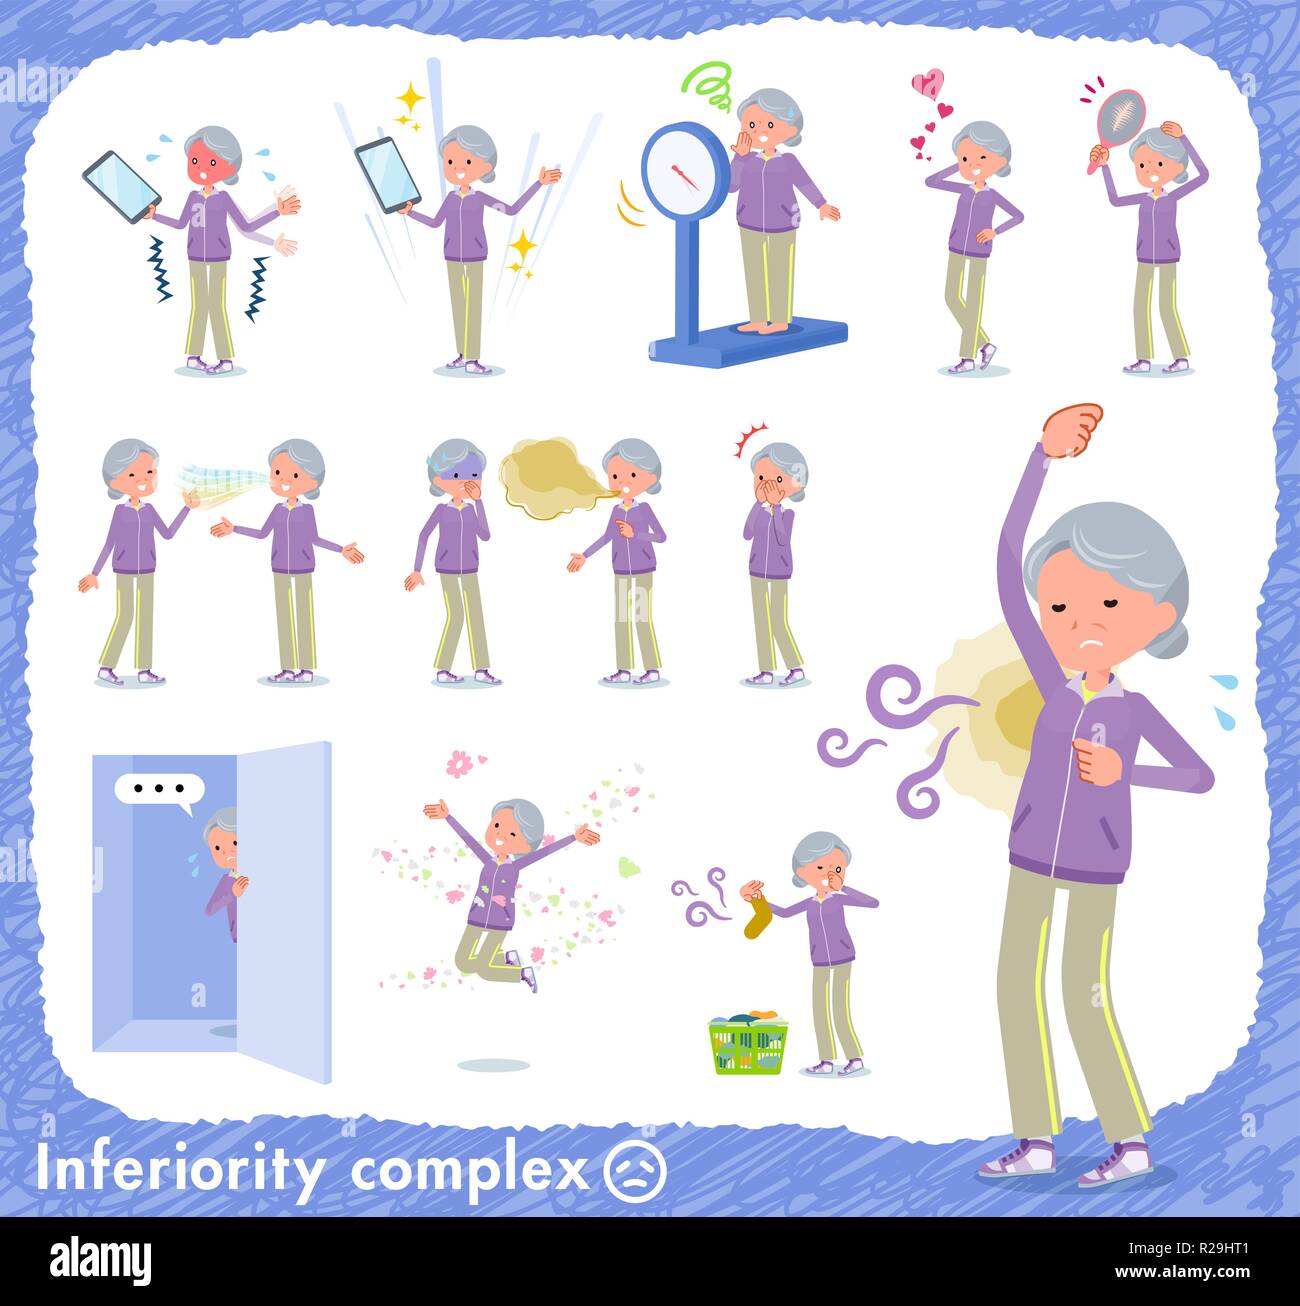 A set of old women in sportswear on inferiority complex.There are actions suffering from smell and appearance.It's vector art so it's easy to edit. Stock Vector